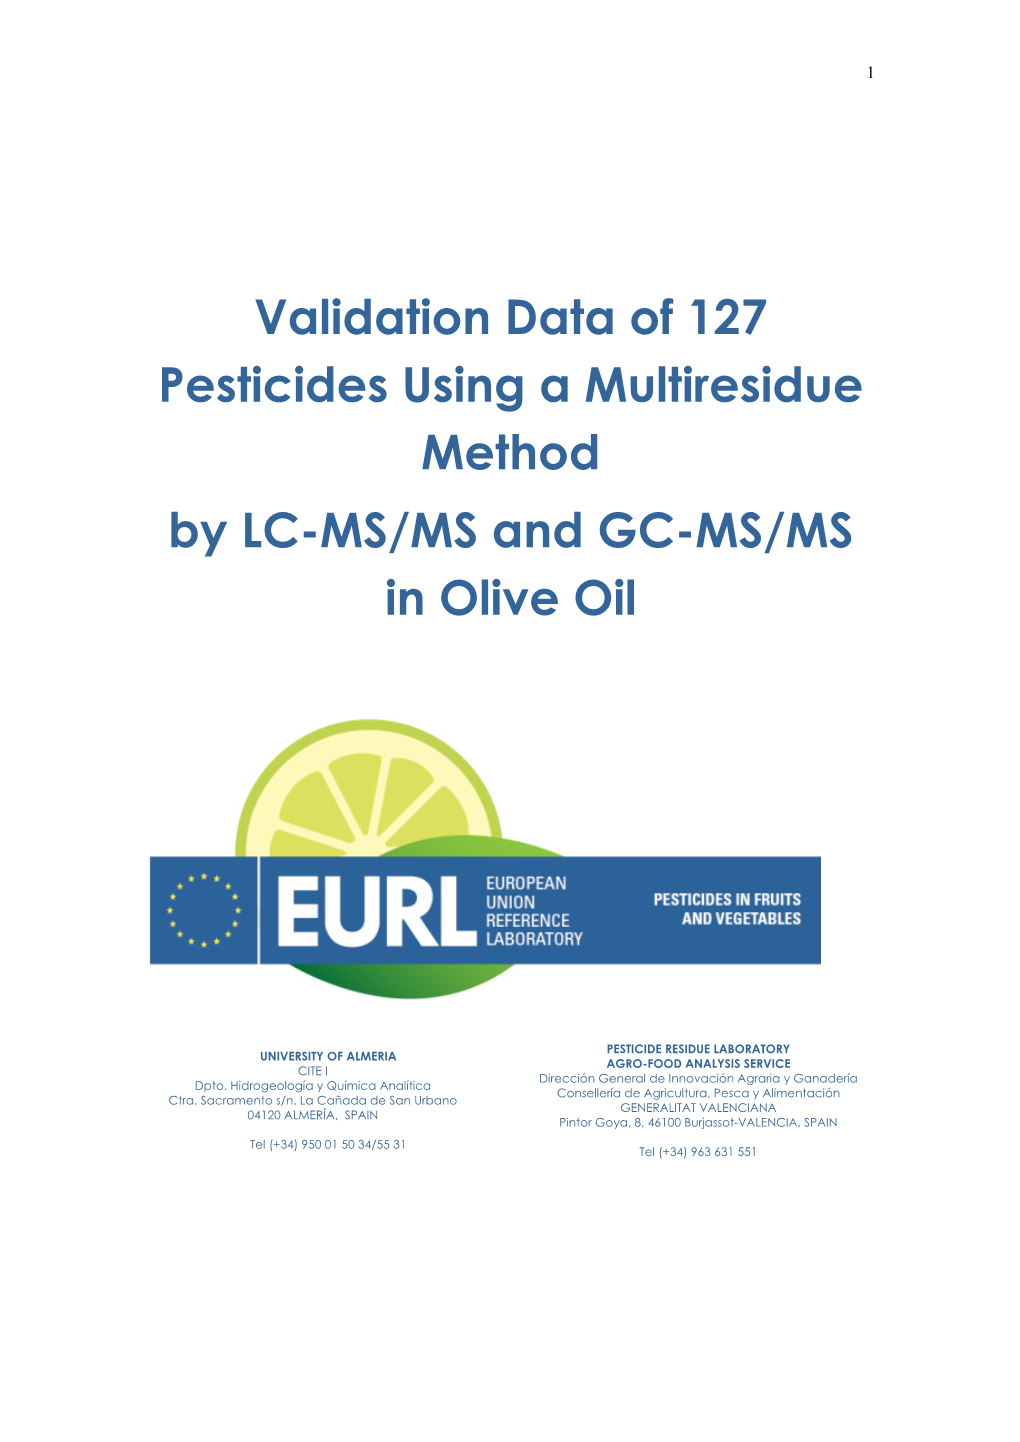 Validation Data of 127 Pesticides Using a Multiresidue Method by LC-MS/MS and GC-MS/MS in Olive Oil